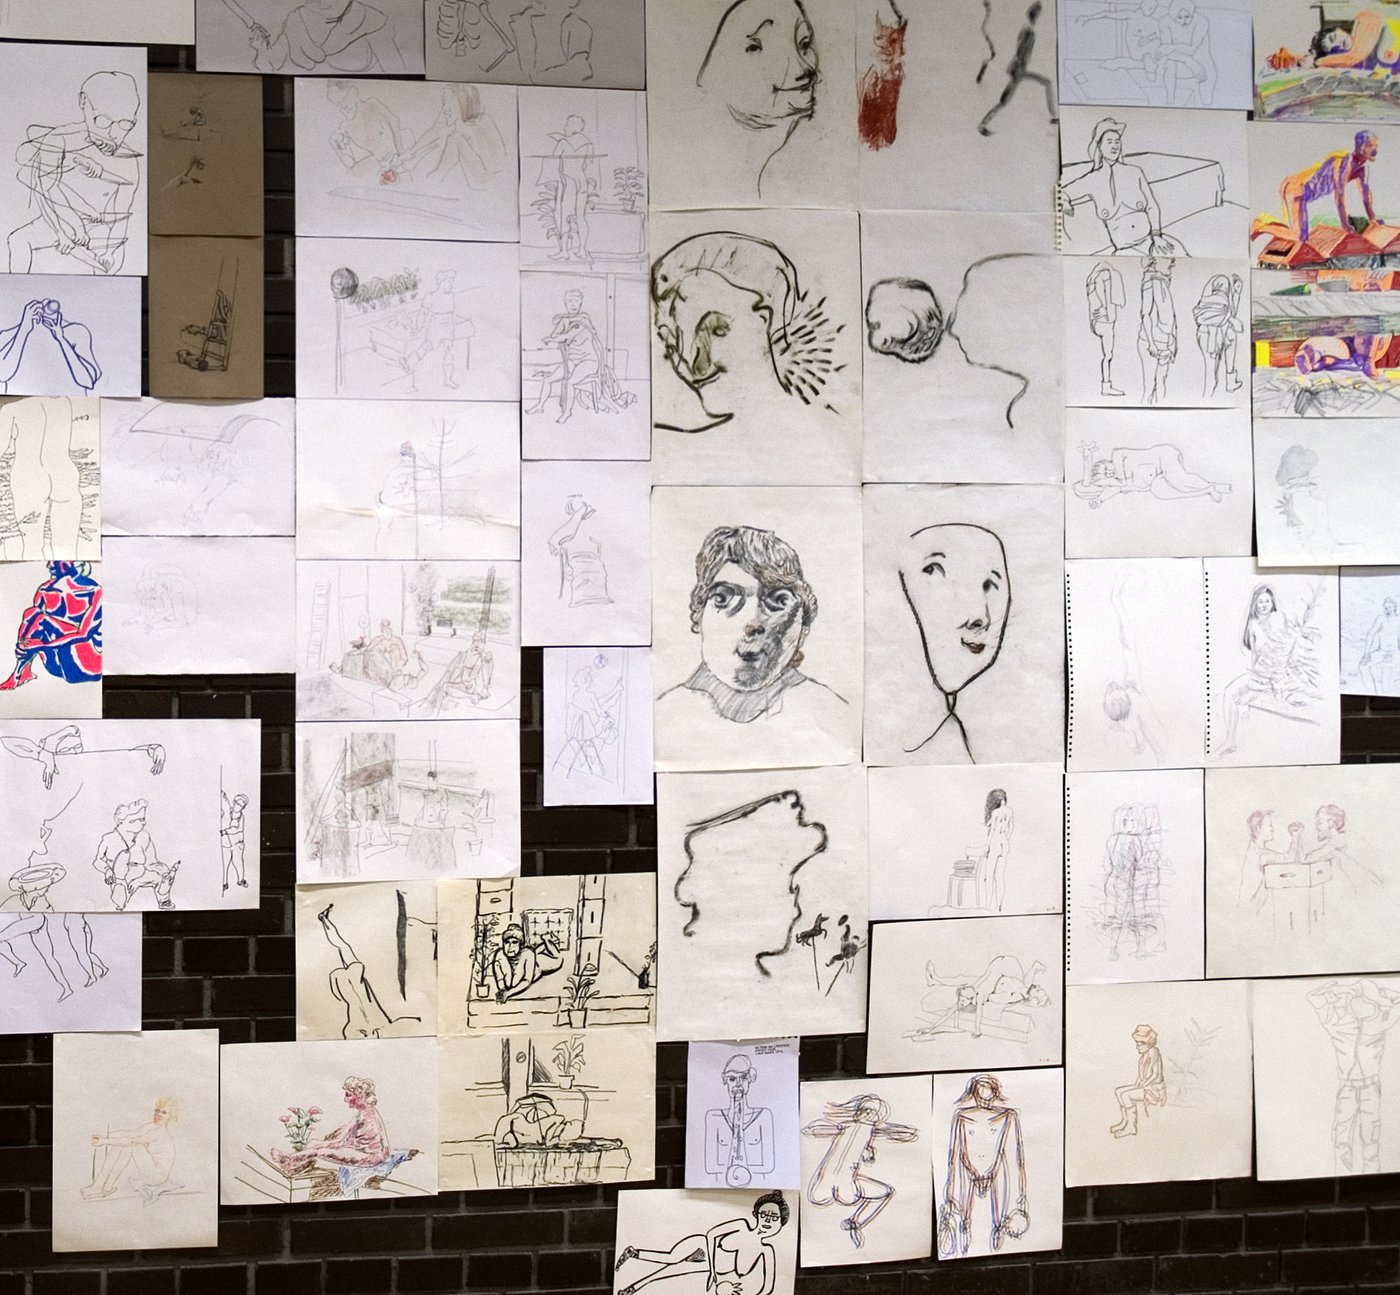 Exhibition wall with many drawings